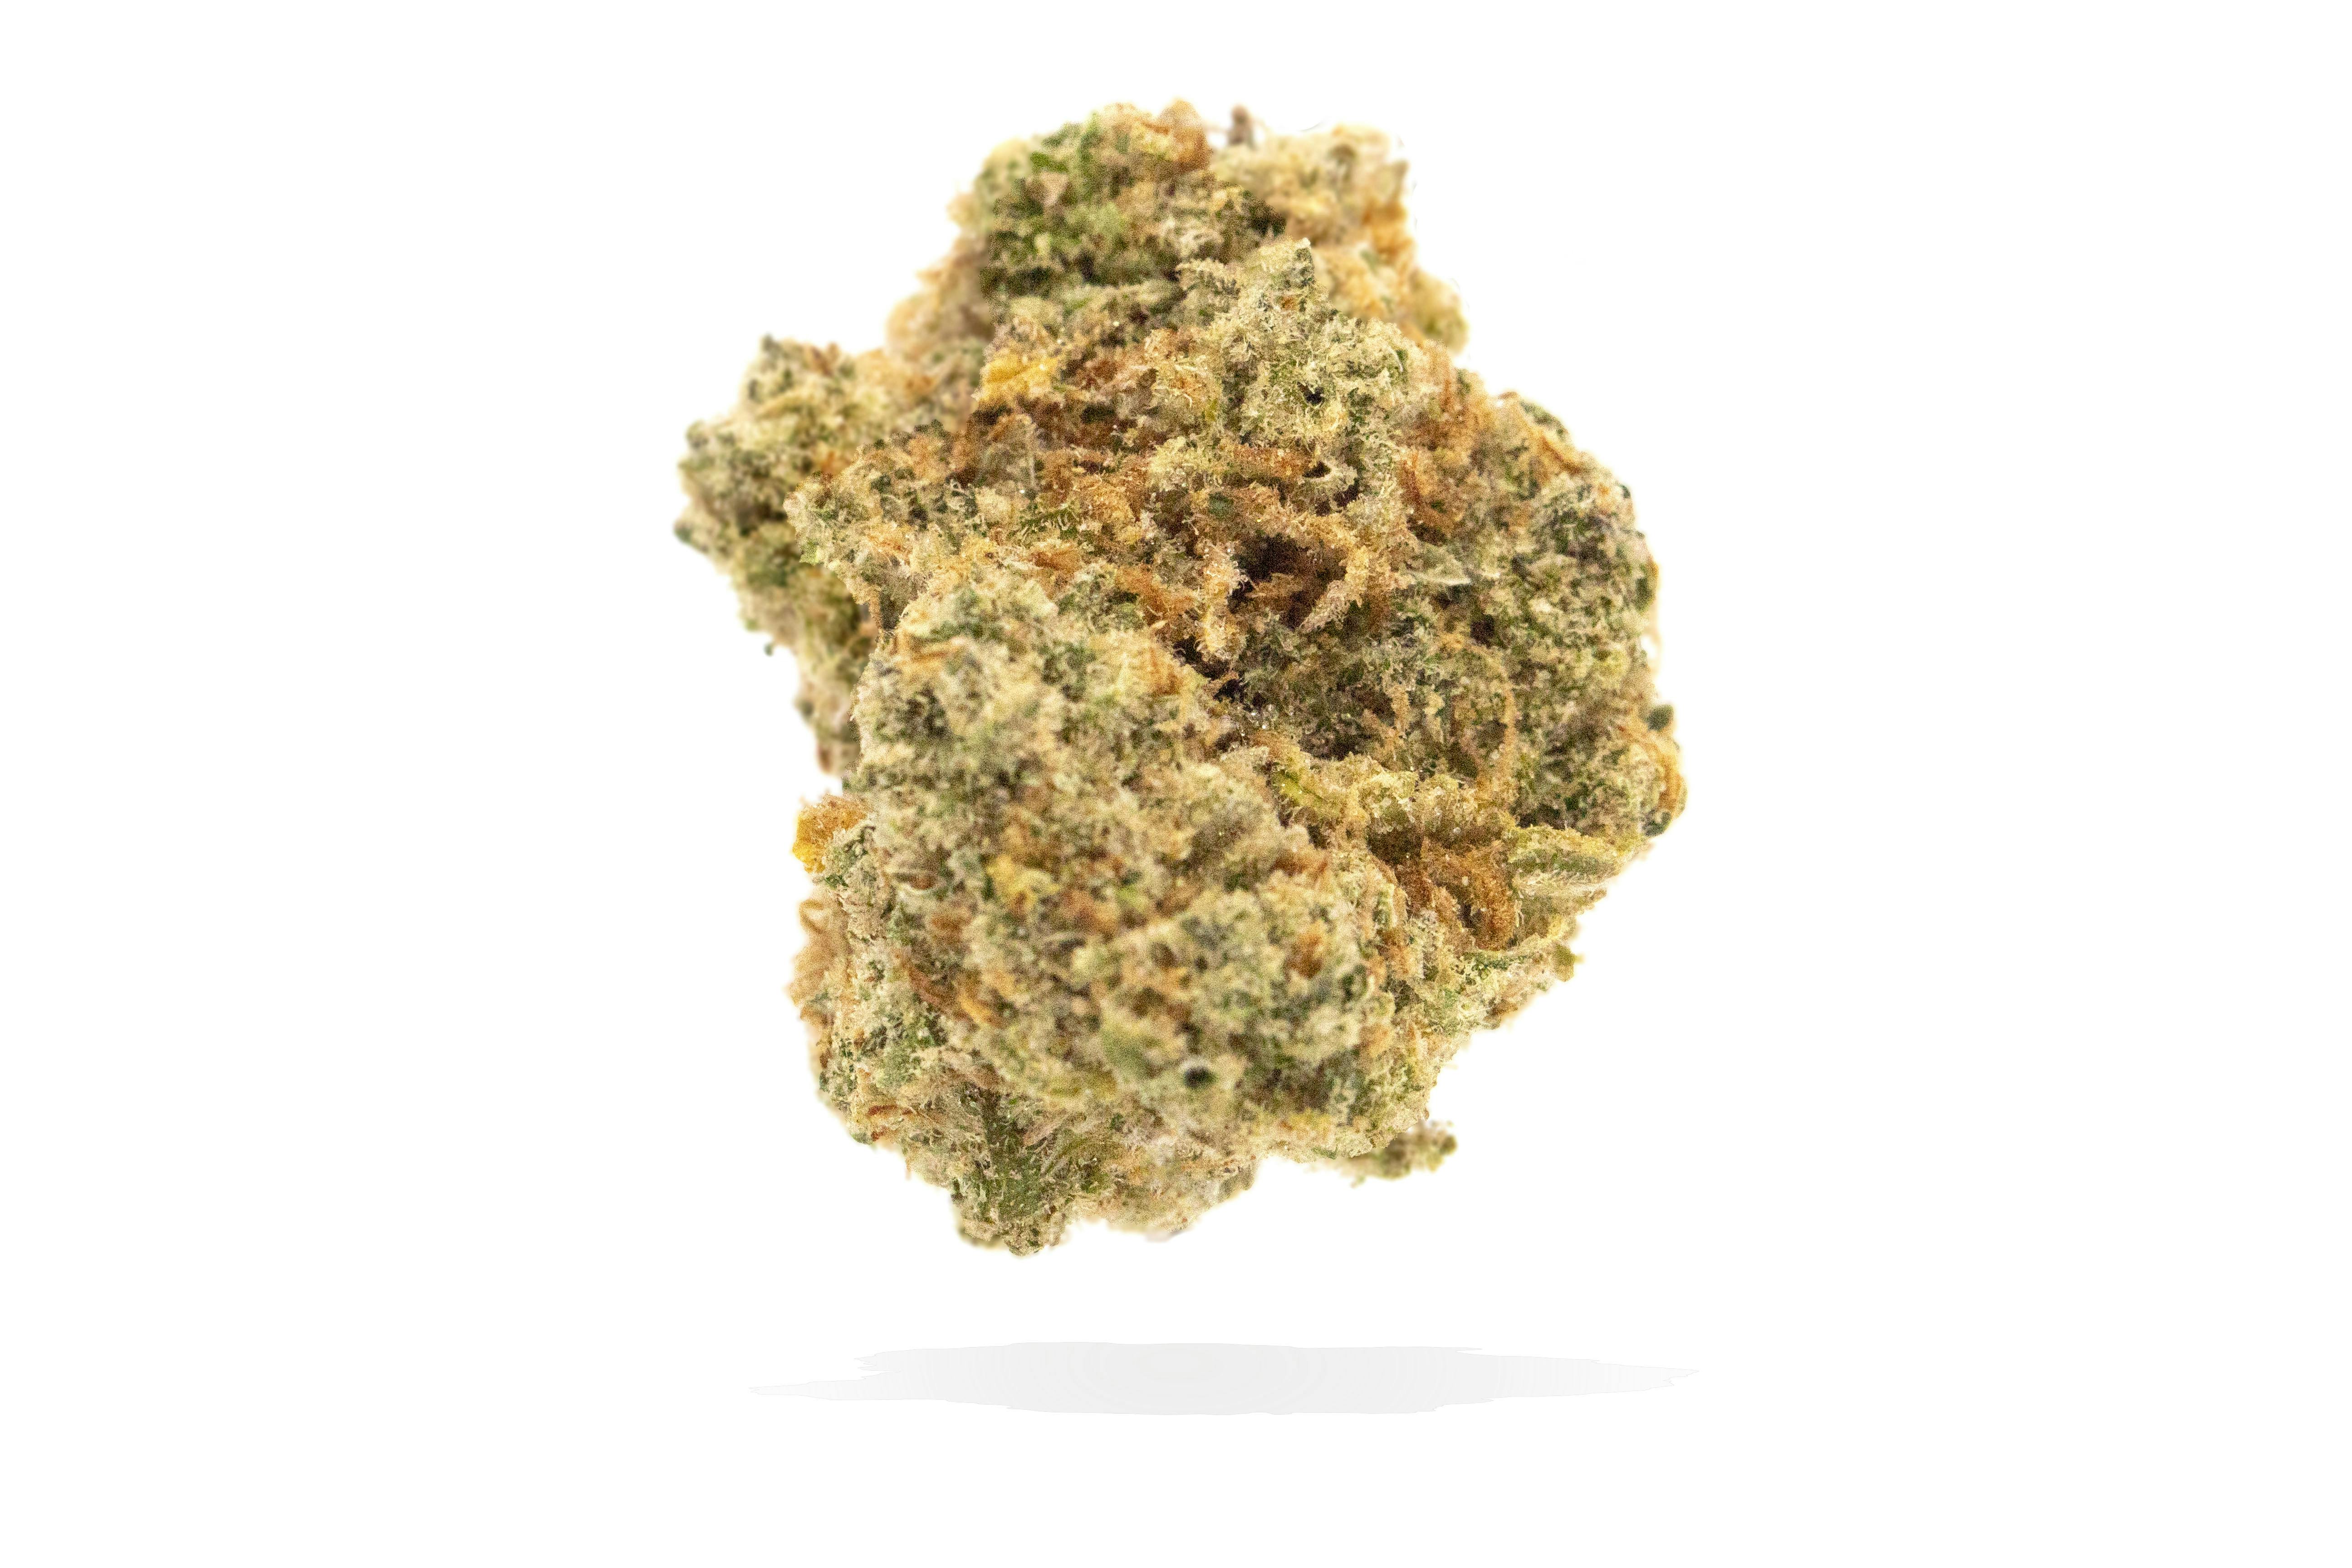 Mighty Fine | Certified Organic Jack Herer | 7g | Buy any ONE Mighty Fine Qtr, Receive ONE FREE Mighty Fine Select PRJ's